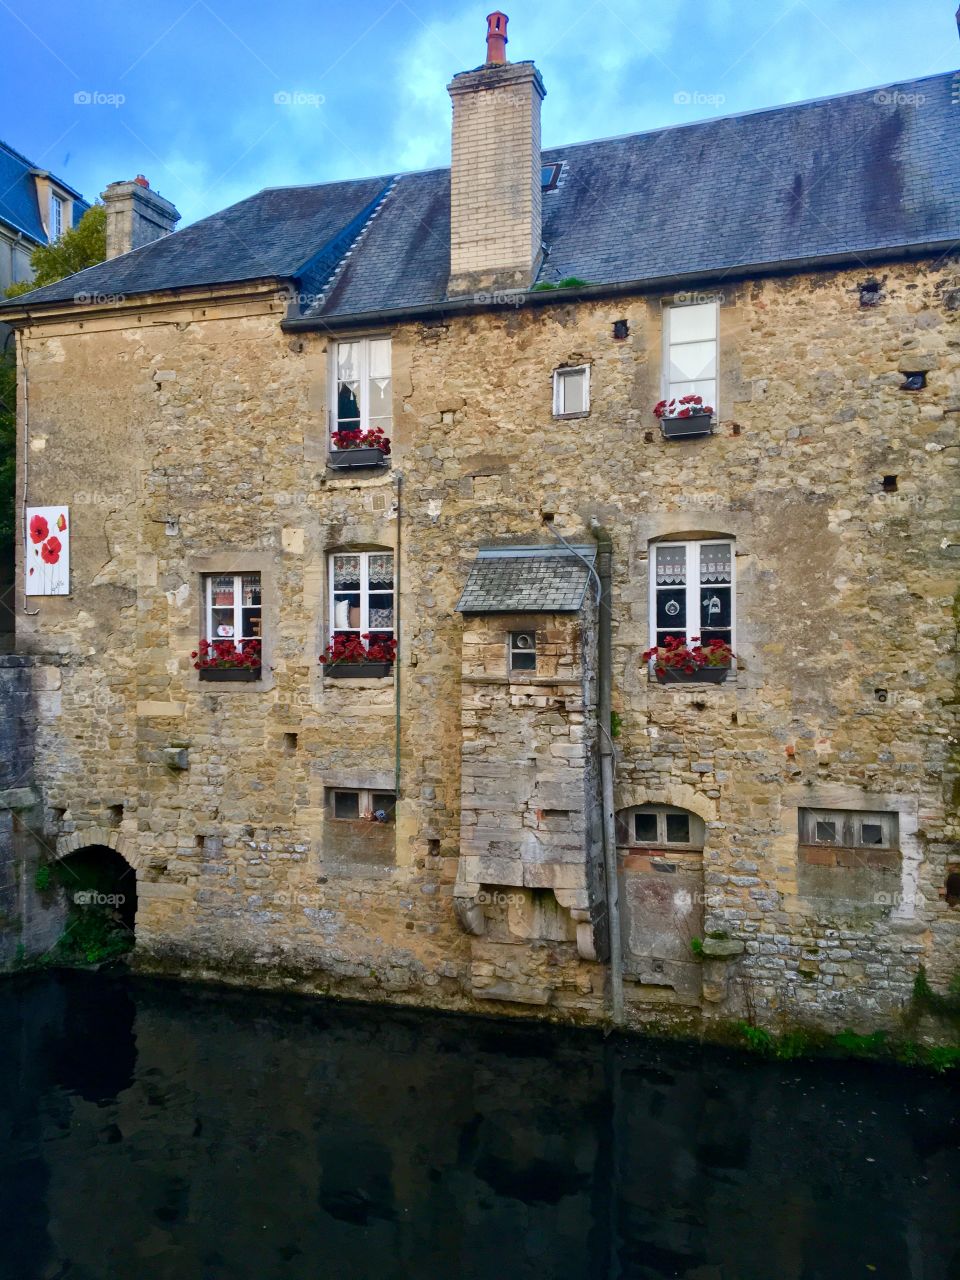 Bayeaux, France